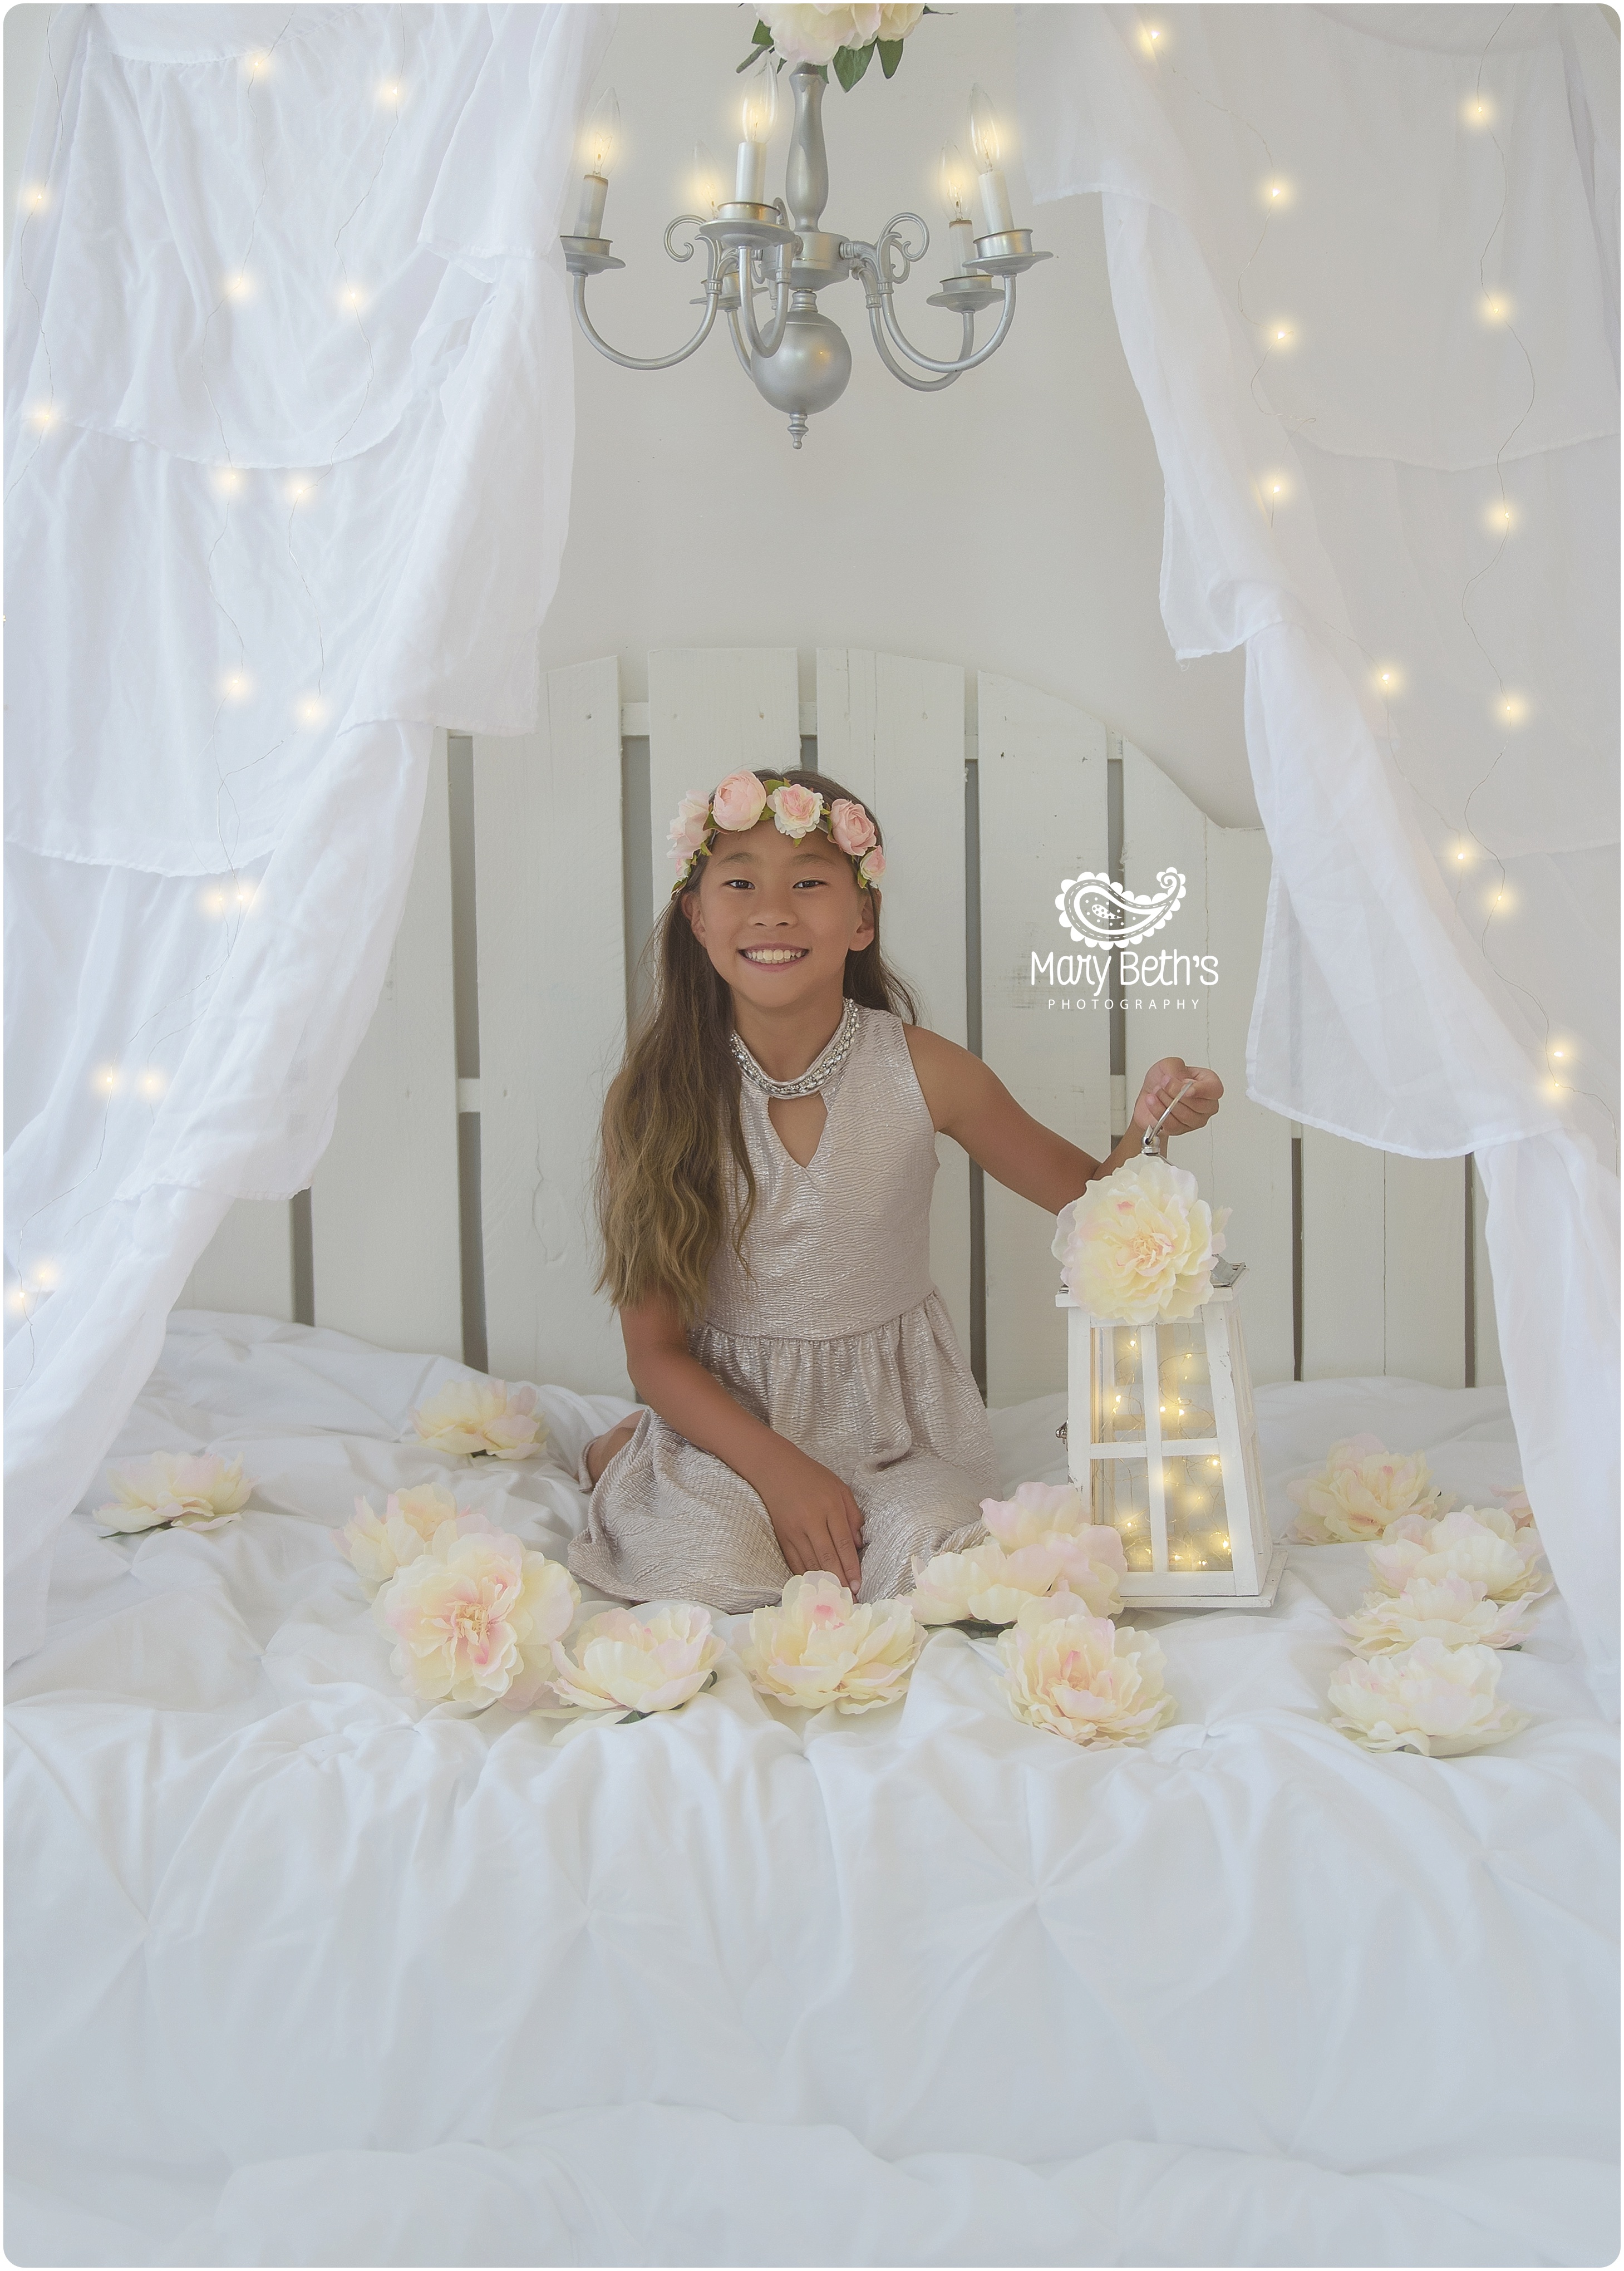 Girl in fairylight tent with lantern and hanging tulips